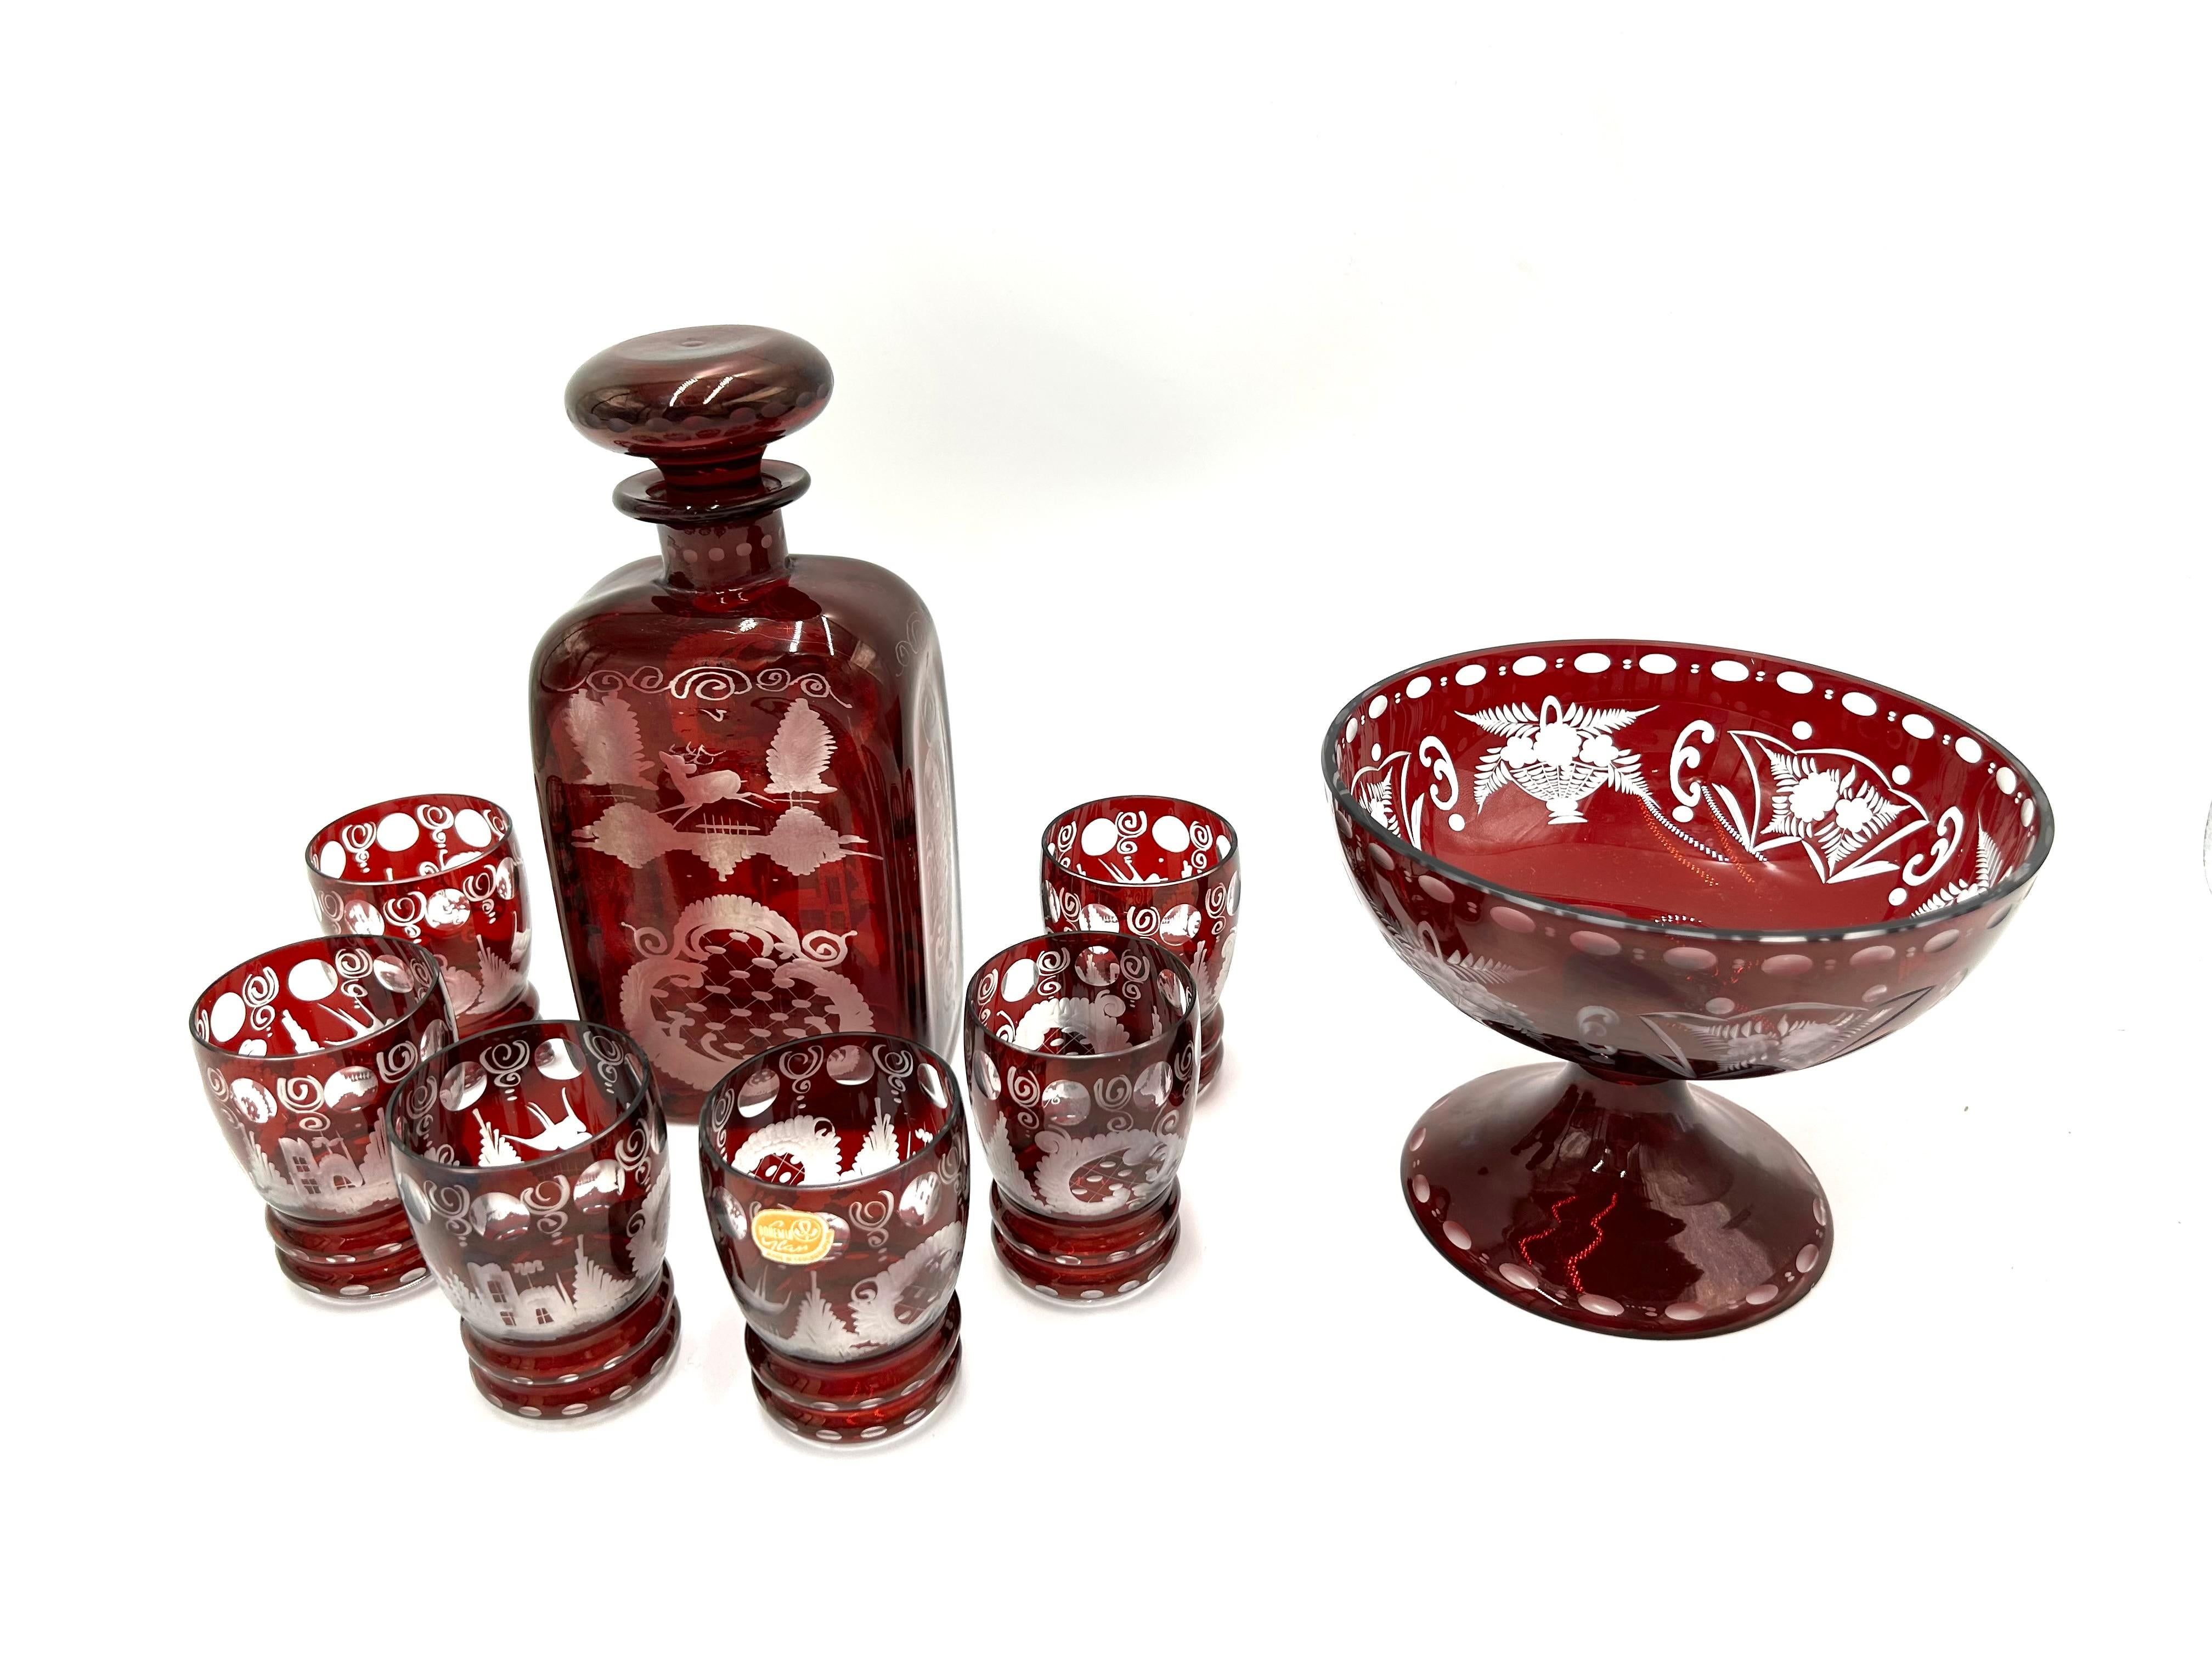 Ruby glass liqueur set: decanter, 6 glasses and a plate.

Produced by Bohemia in Czechoslovakia in the 1960s.

Original sticker retained

Very good condition without damage

Measures: carafe: height 21cm, width 9.5cm, depth 6.5cm

glass: